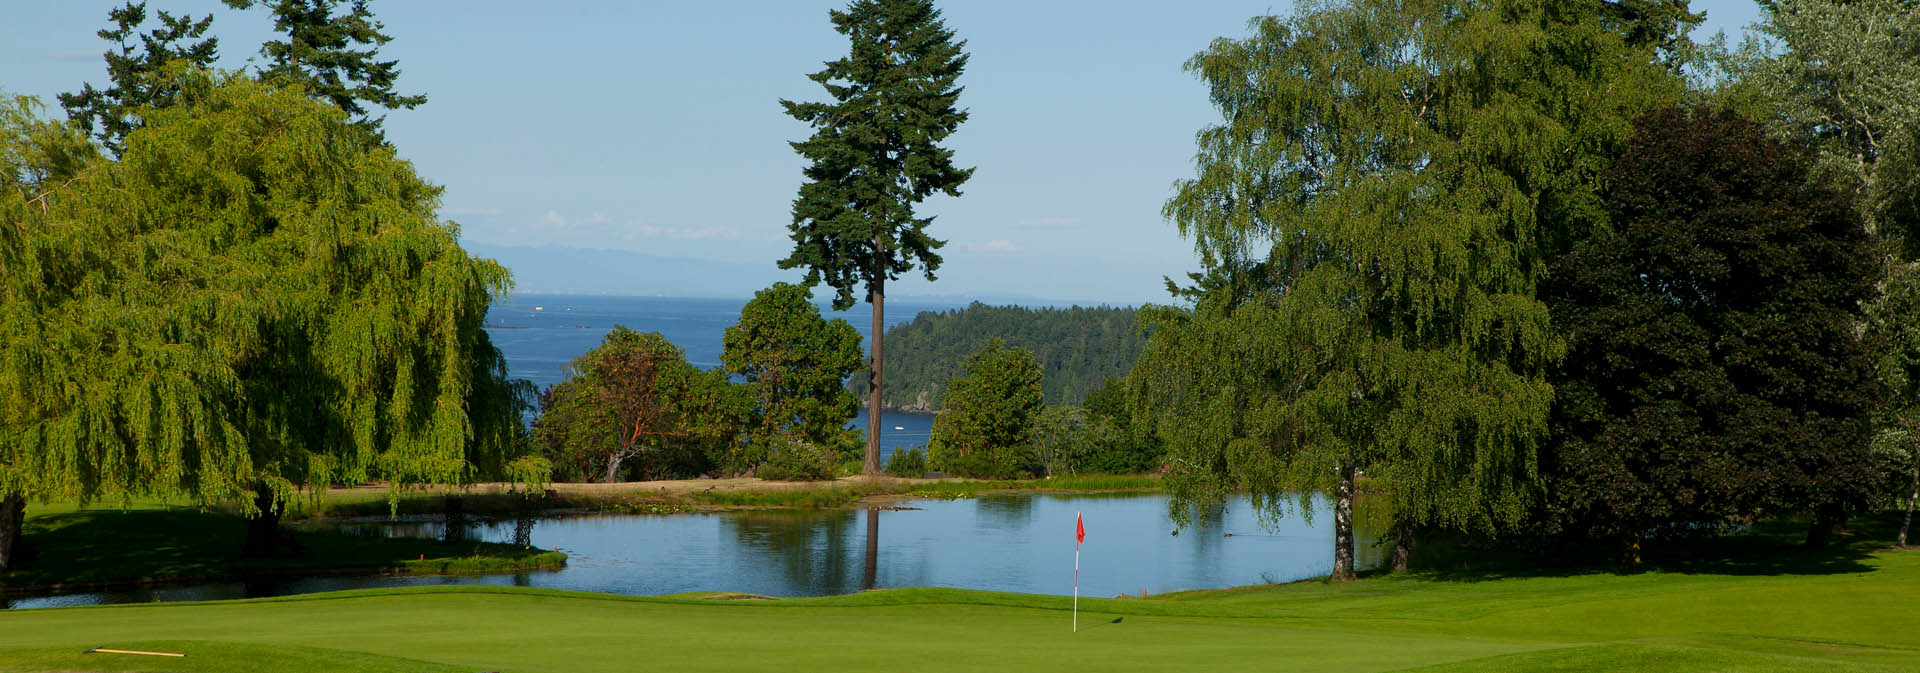 https://www.nanaimogolfclub.ca/SiteDesign/home-rotating-images/img1.aspx?width=1920&height=673&ext=.jpg